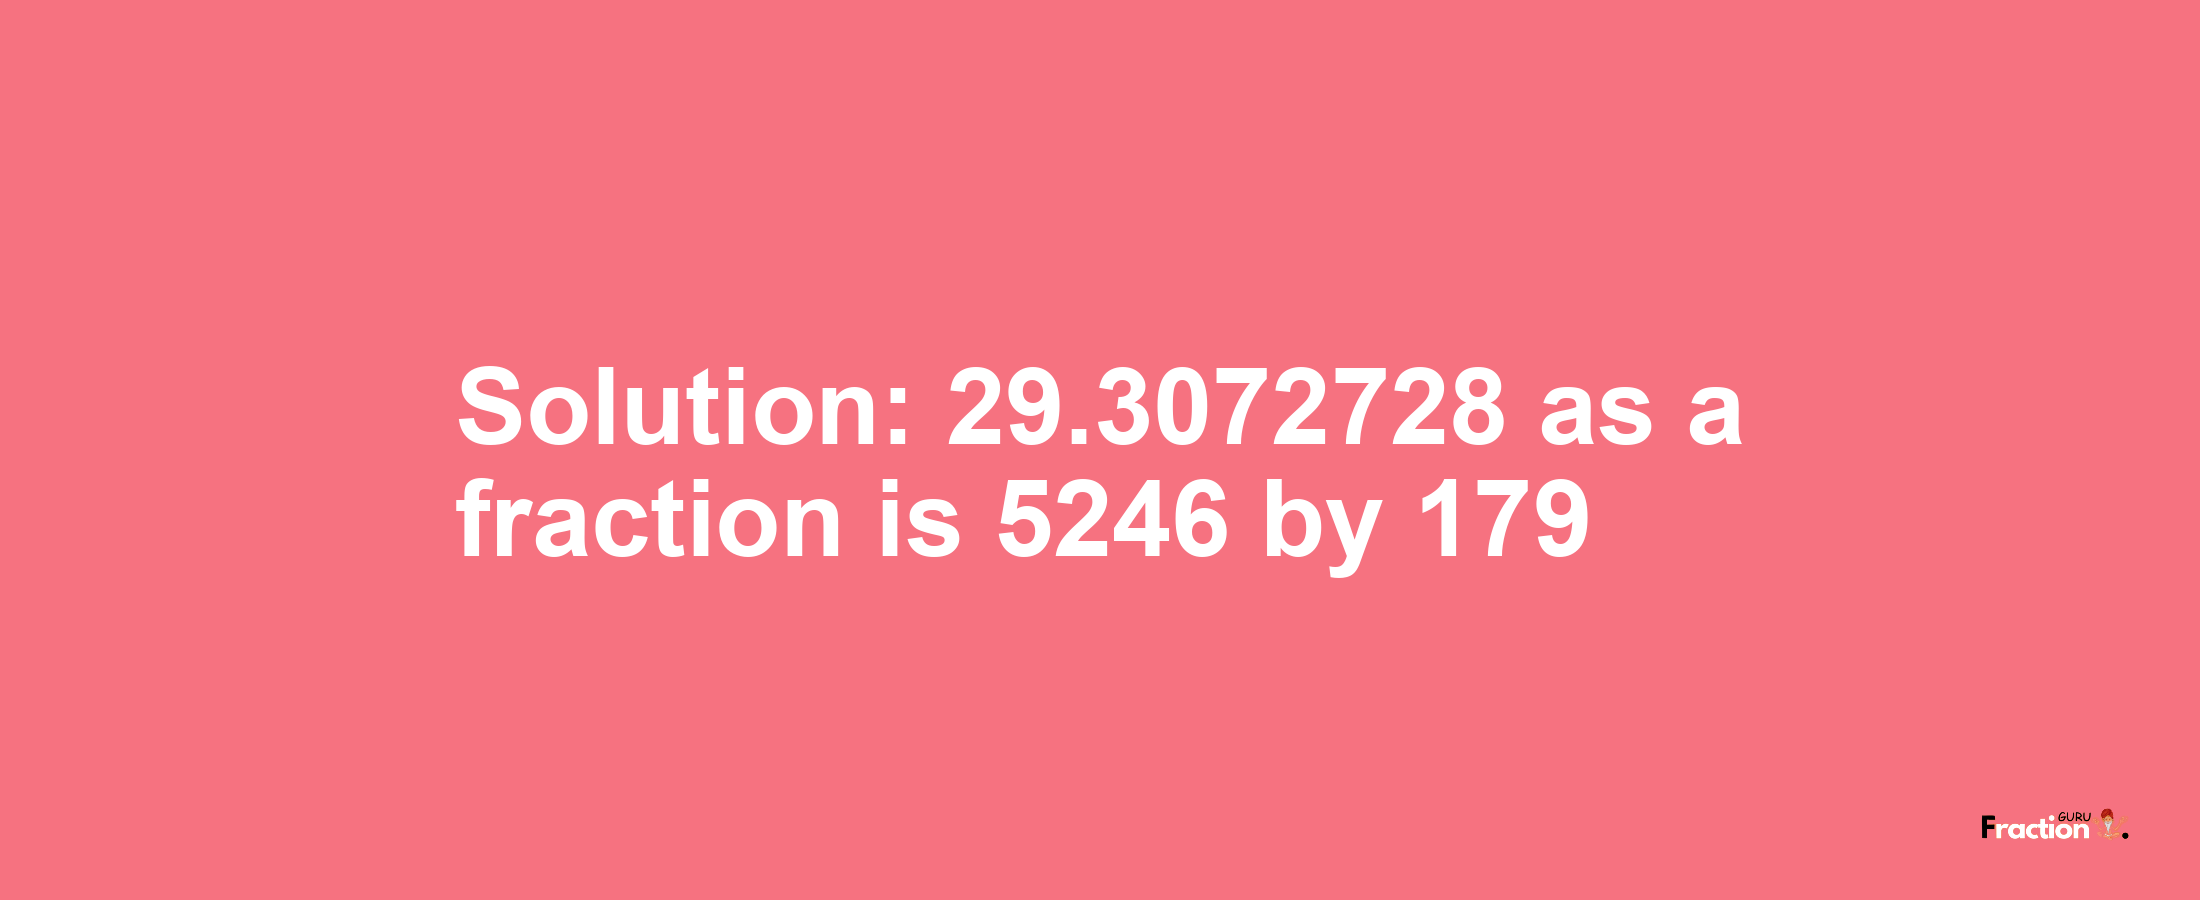 Solution:29.3072728 as a fraction is 5246/179